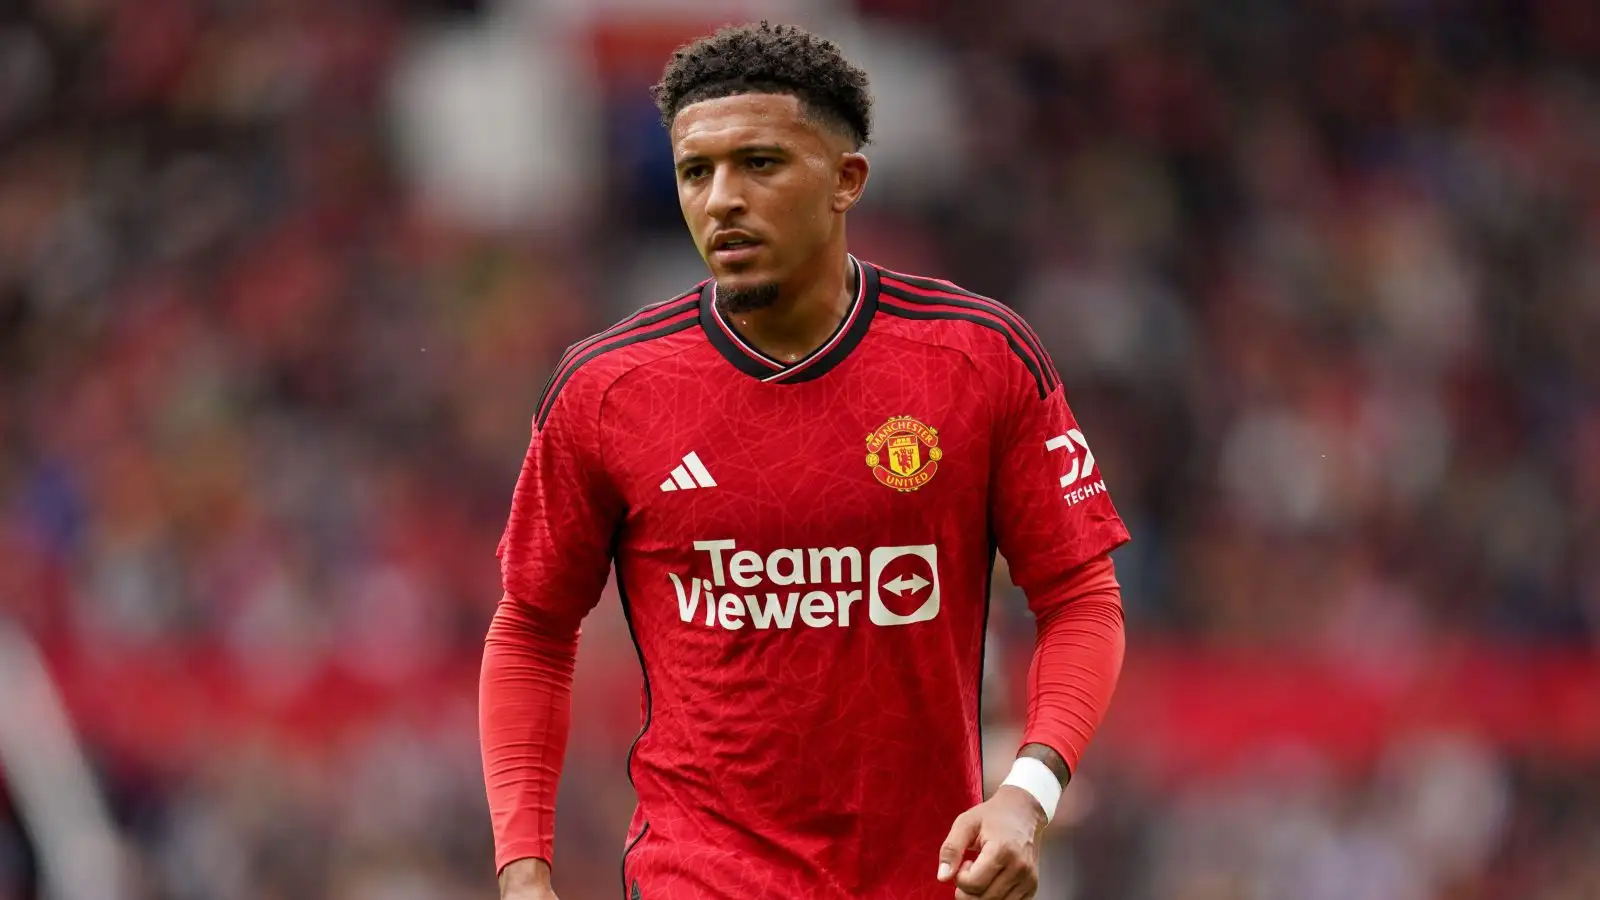 Jadon Sancho during a match for Manchester United.